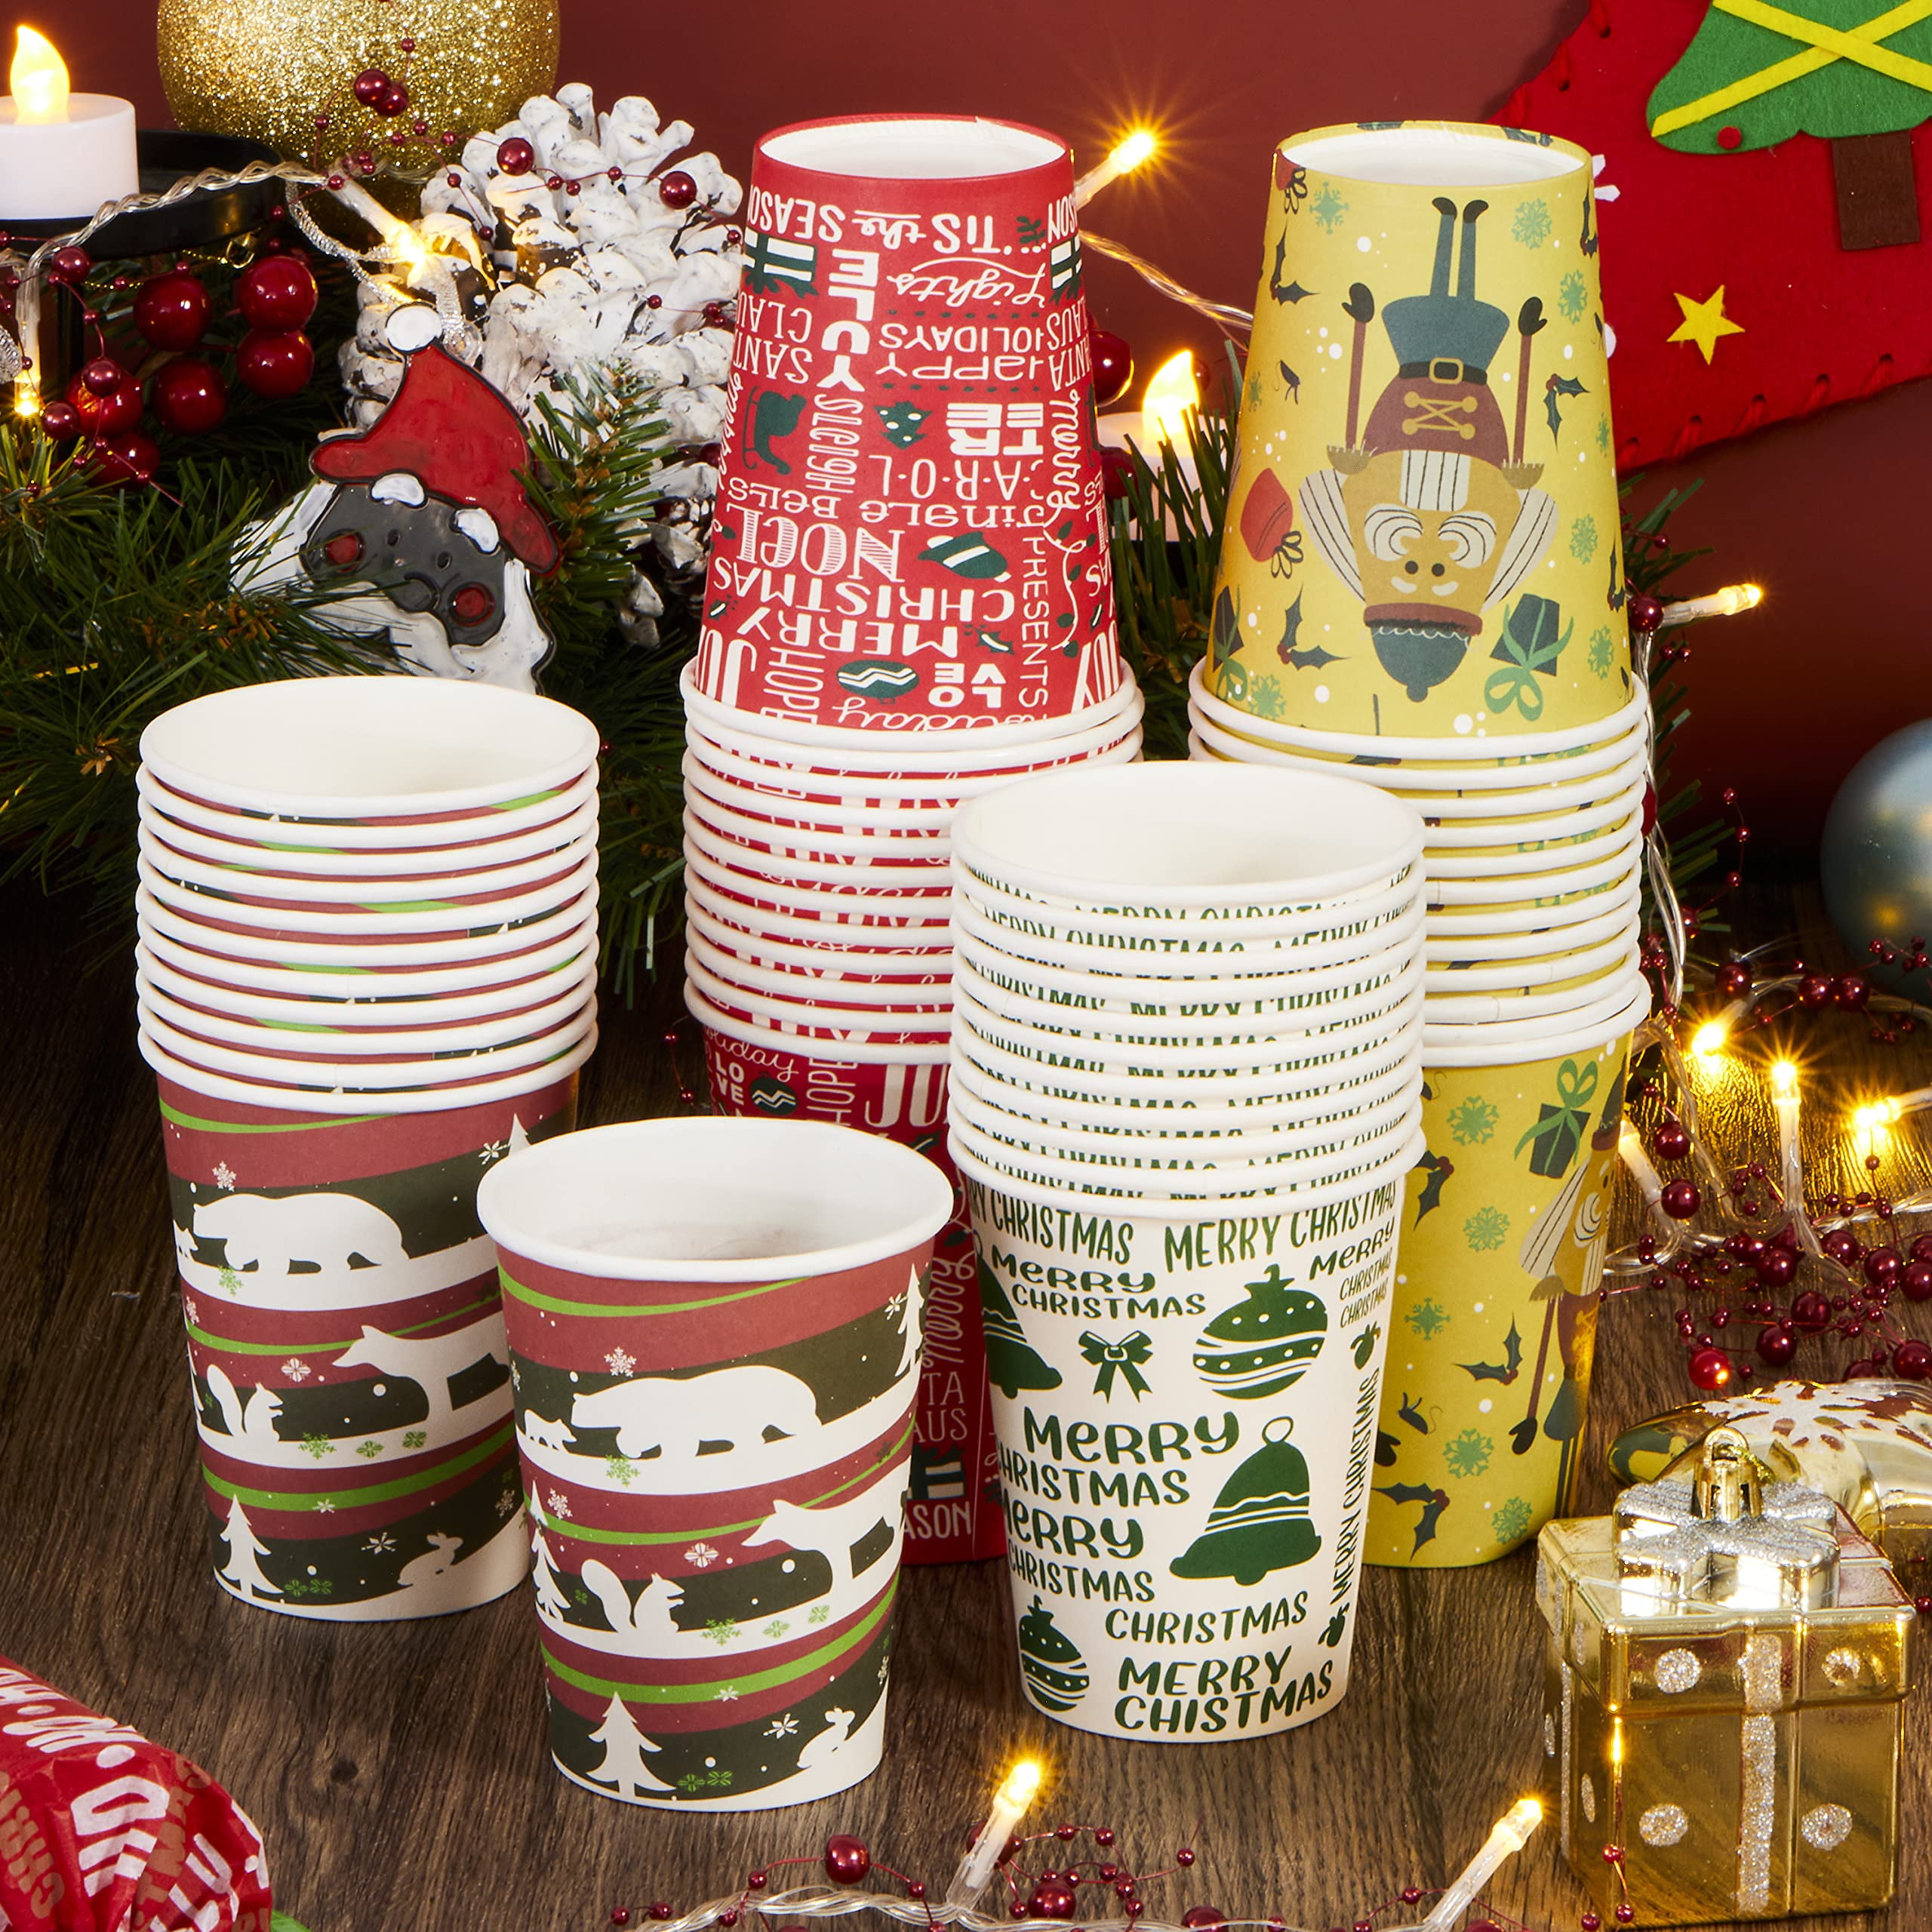 Richboom Christmas Cups, 21 Count, 16oz Disposable Christmas Coffee Cups  Tea Cups Holiday Paper Coff…See more Richboom Christmas Cups, 21 Count,  16oz